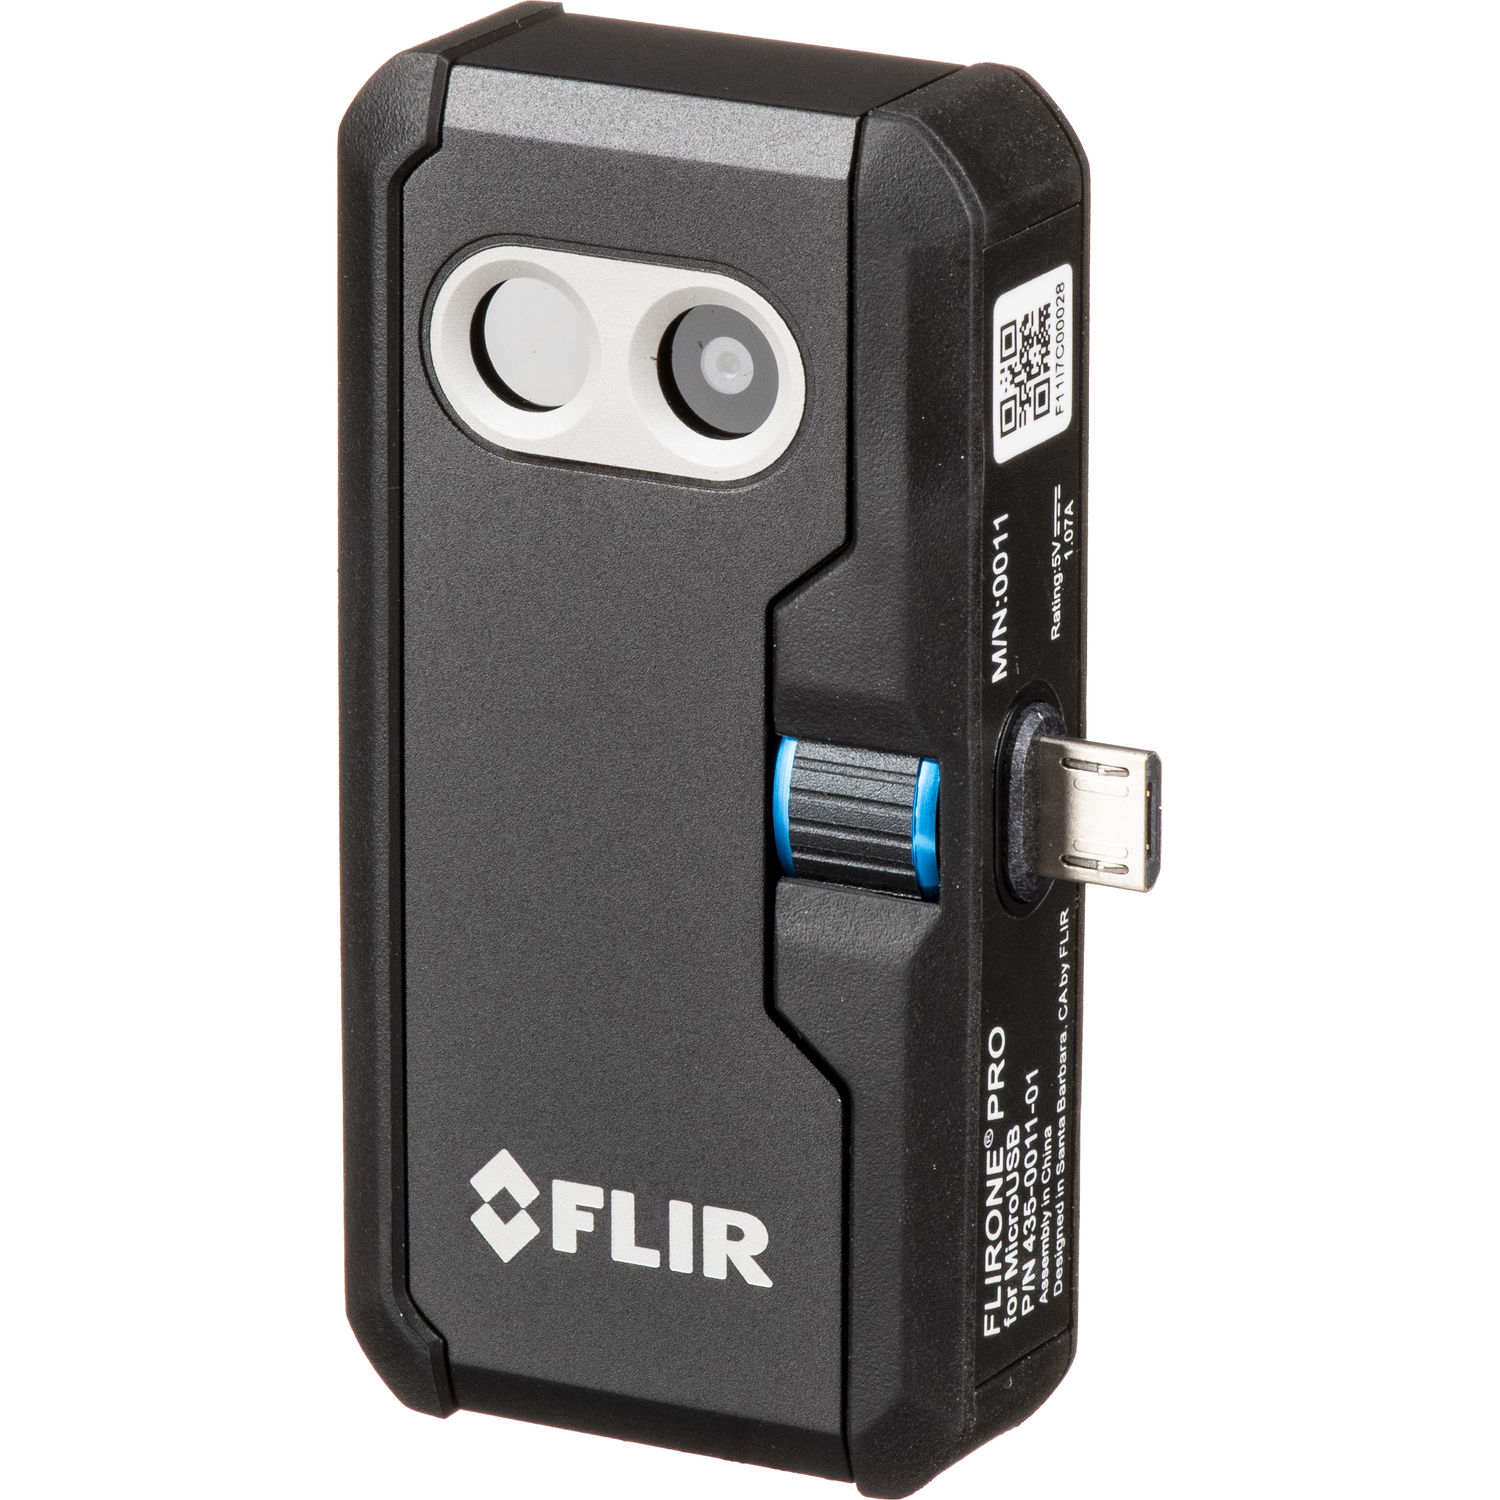 FLIR One Pro Thermal Camera for Smartphones (Micro-USB) $200 at B&H $199.99